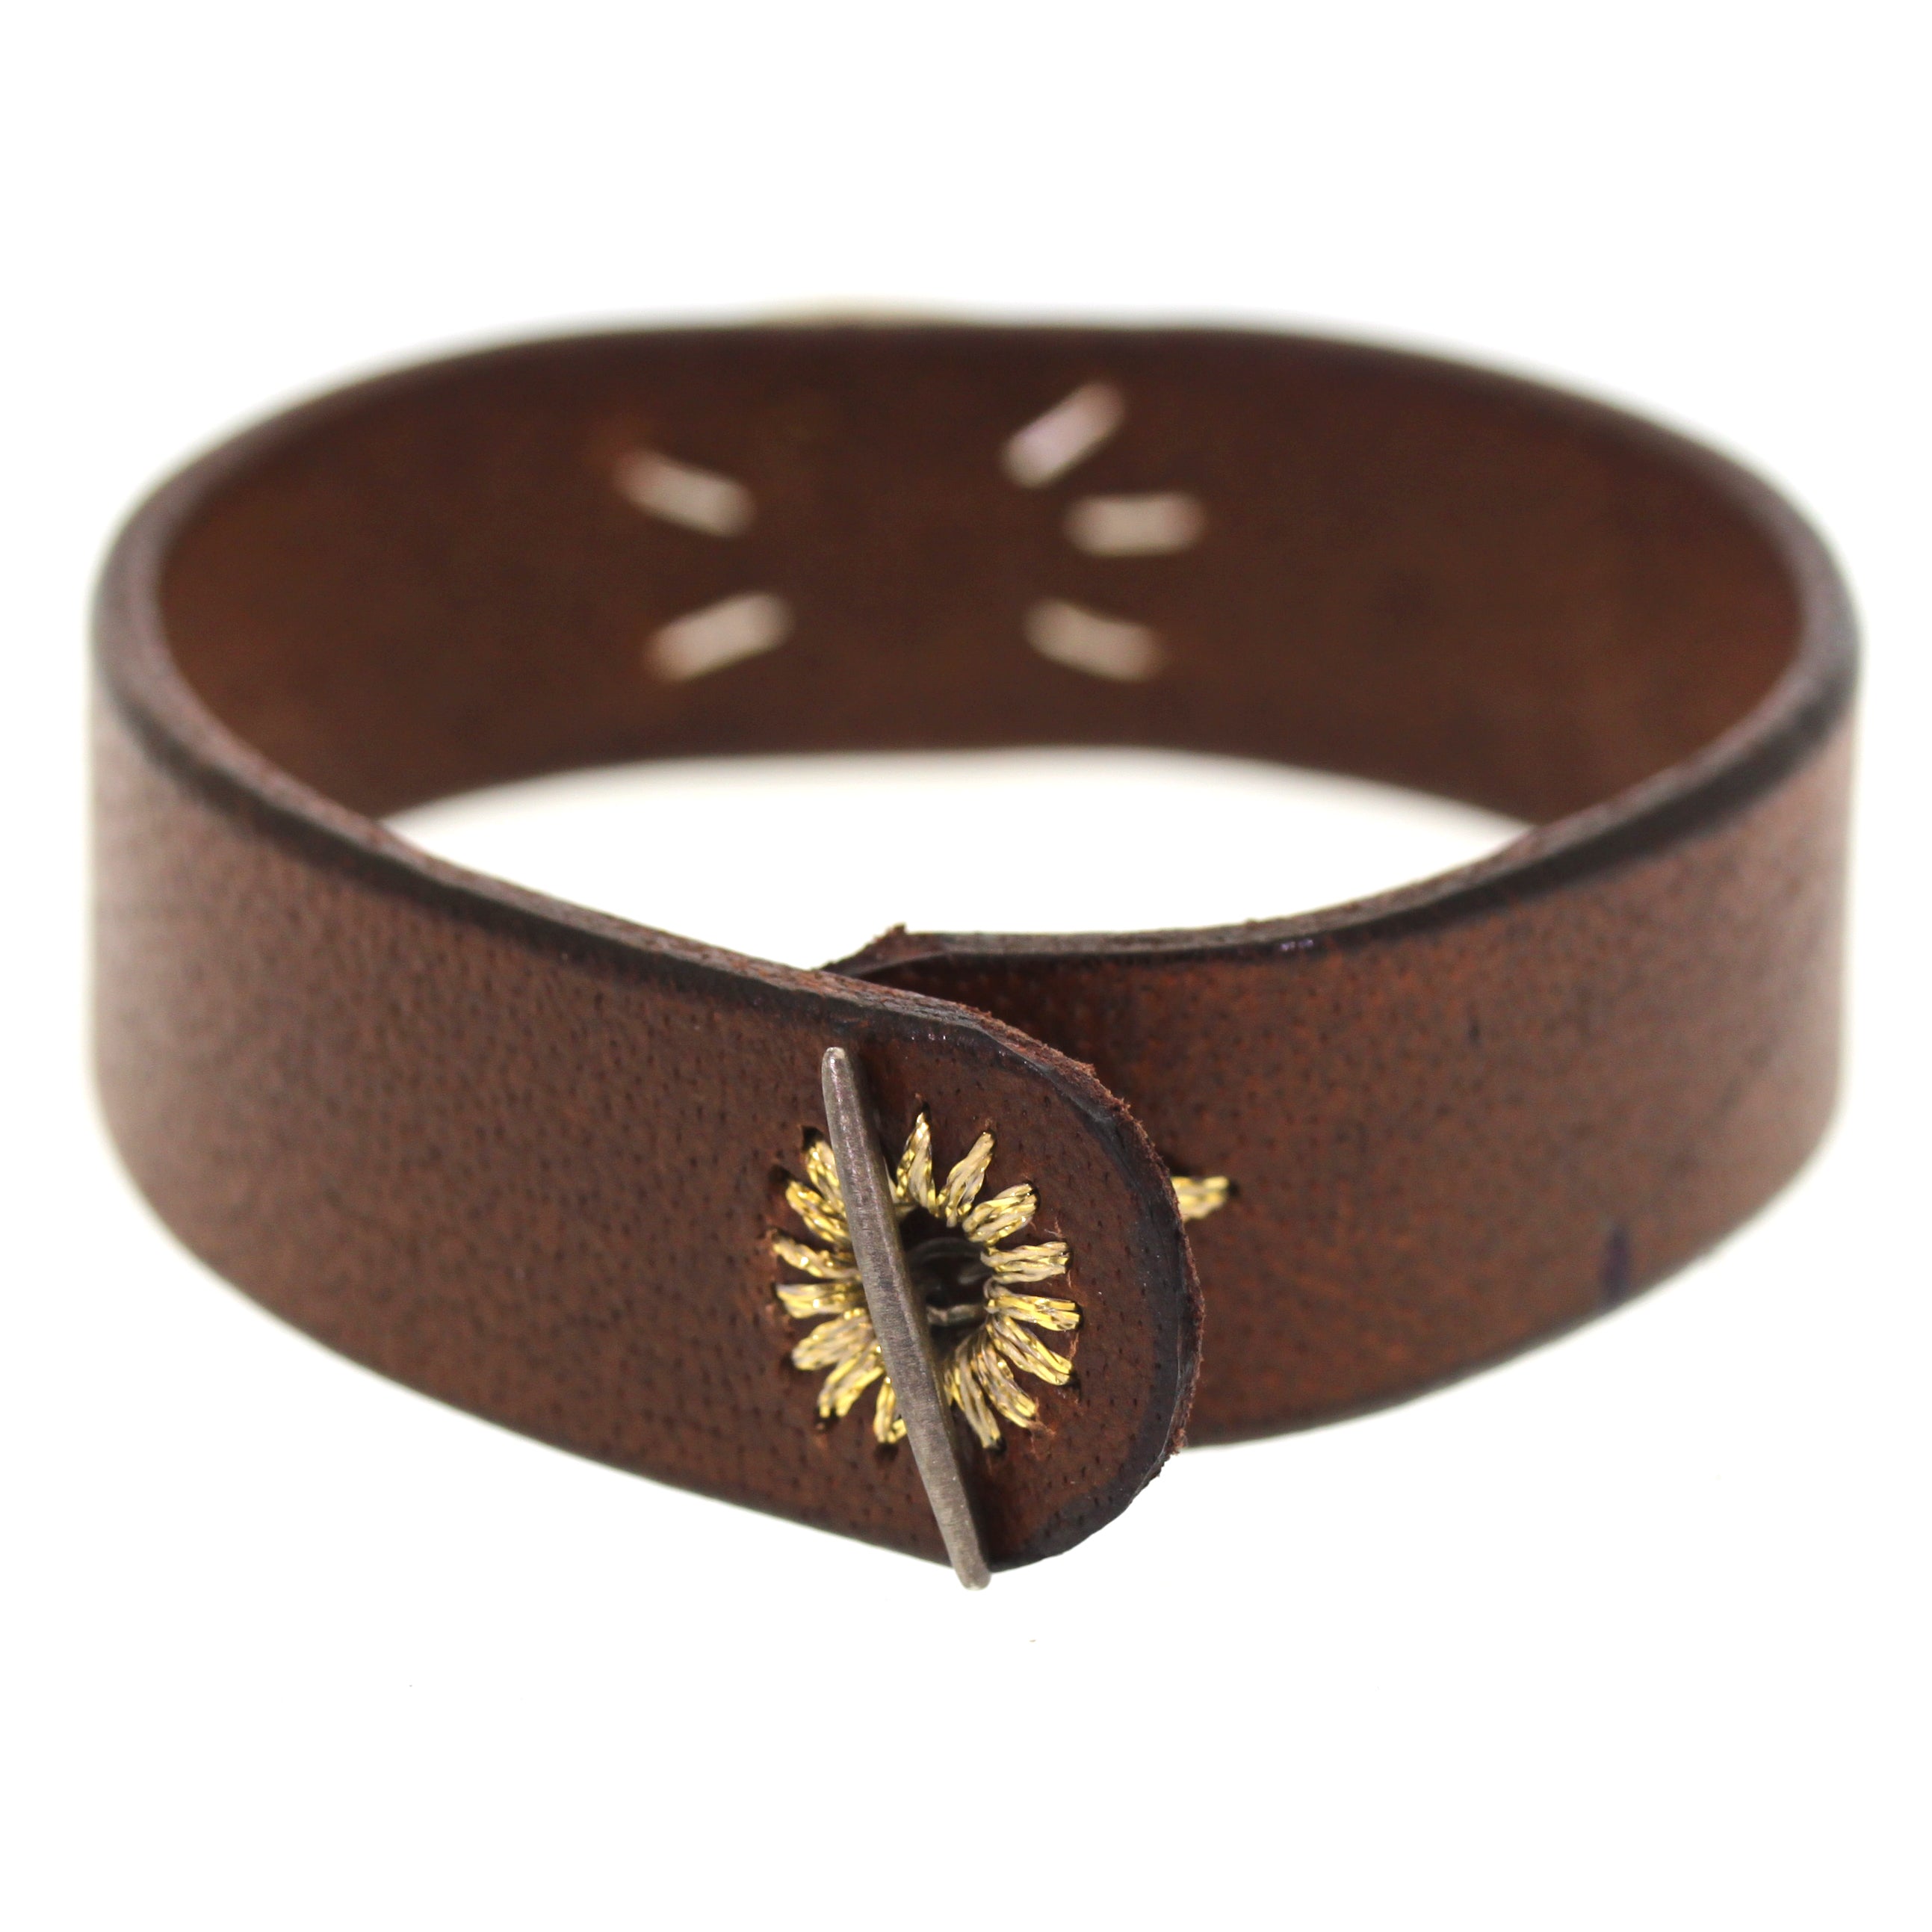 This Rutilated Quartz Leather Bracelet was handcrafted at Rebecca Lankford Designs in Houston Heights. It features a rutilated quartz bezel set in yellow gold on chocolate brown buffalo leather with an oxidized sterling silver closure and a golden thread hand stitched hole. 